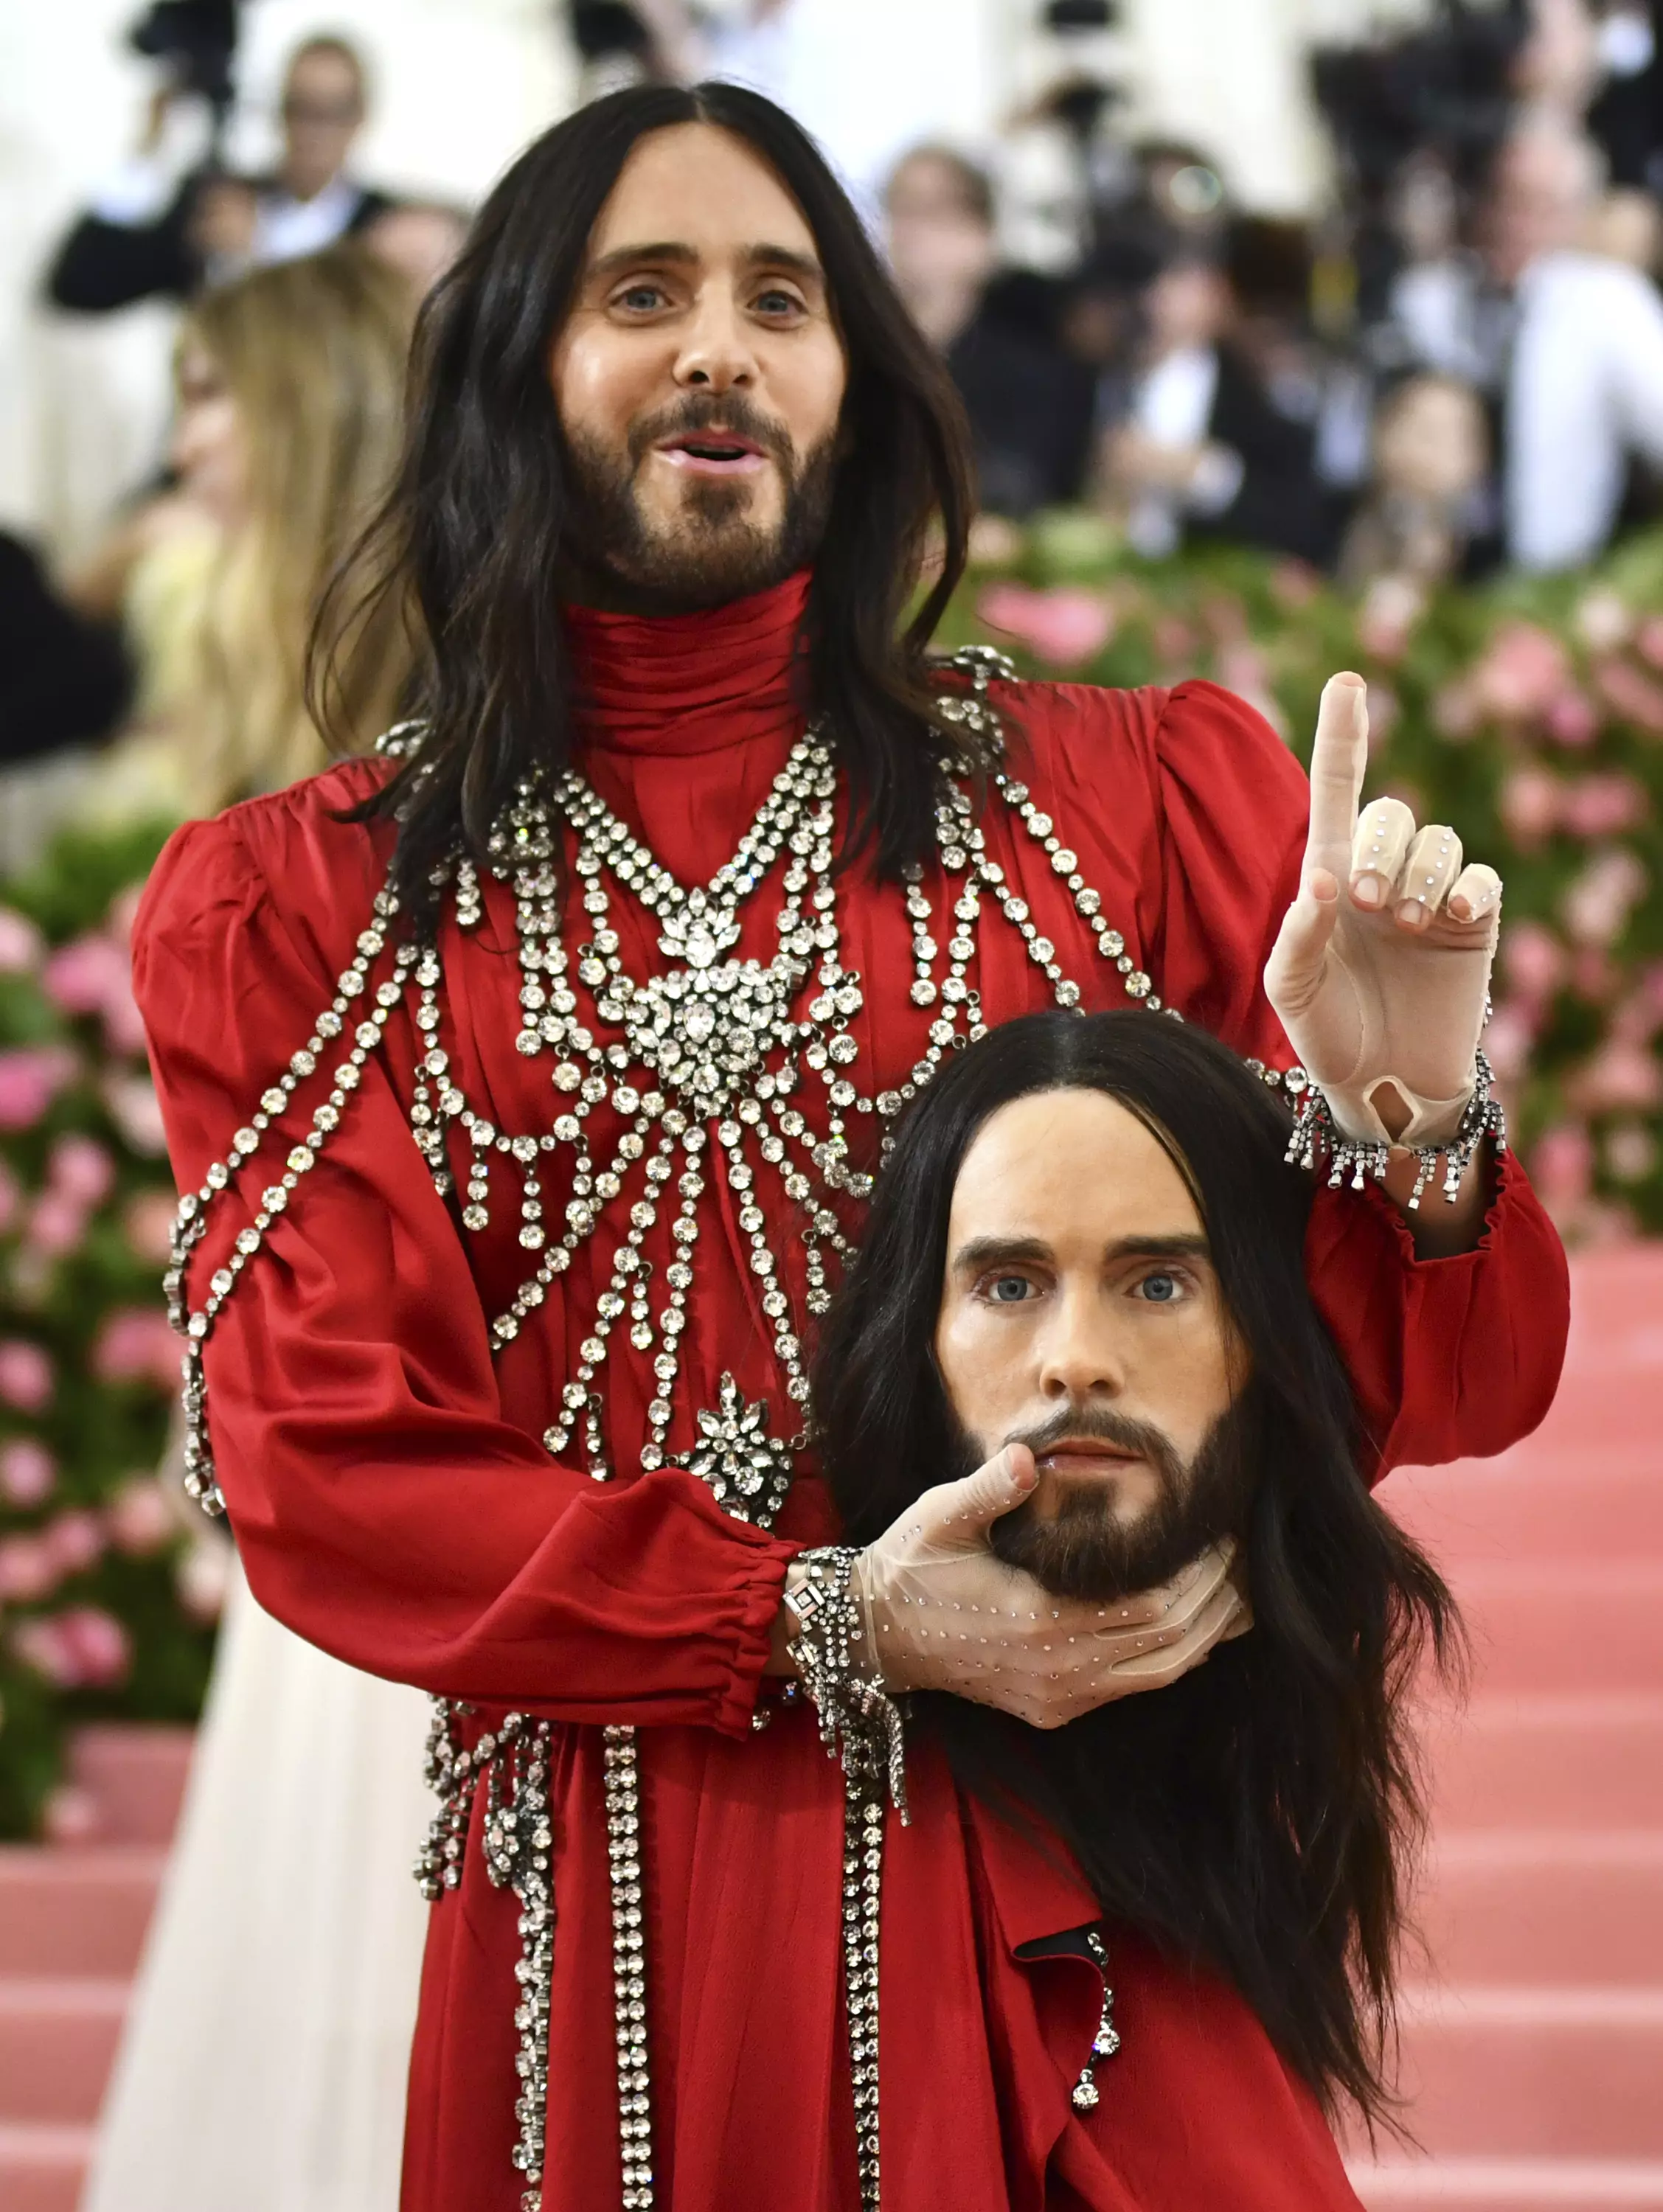 Jared Leto carried a prosthetic head down the red carpet.